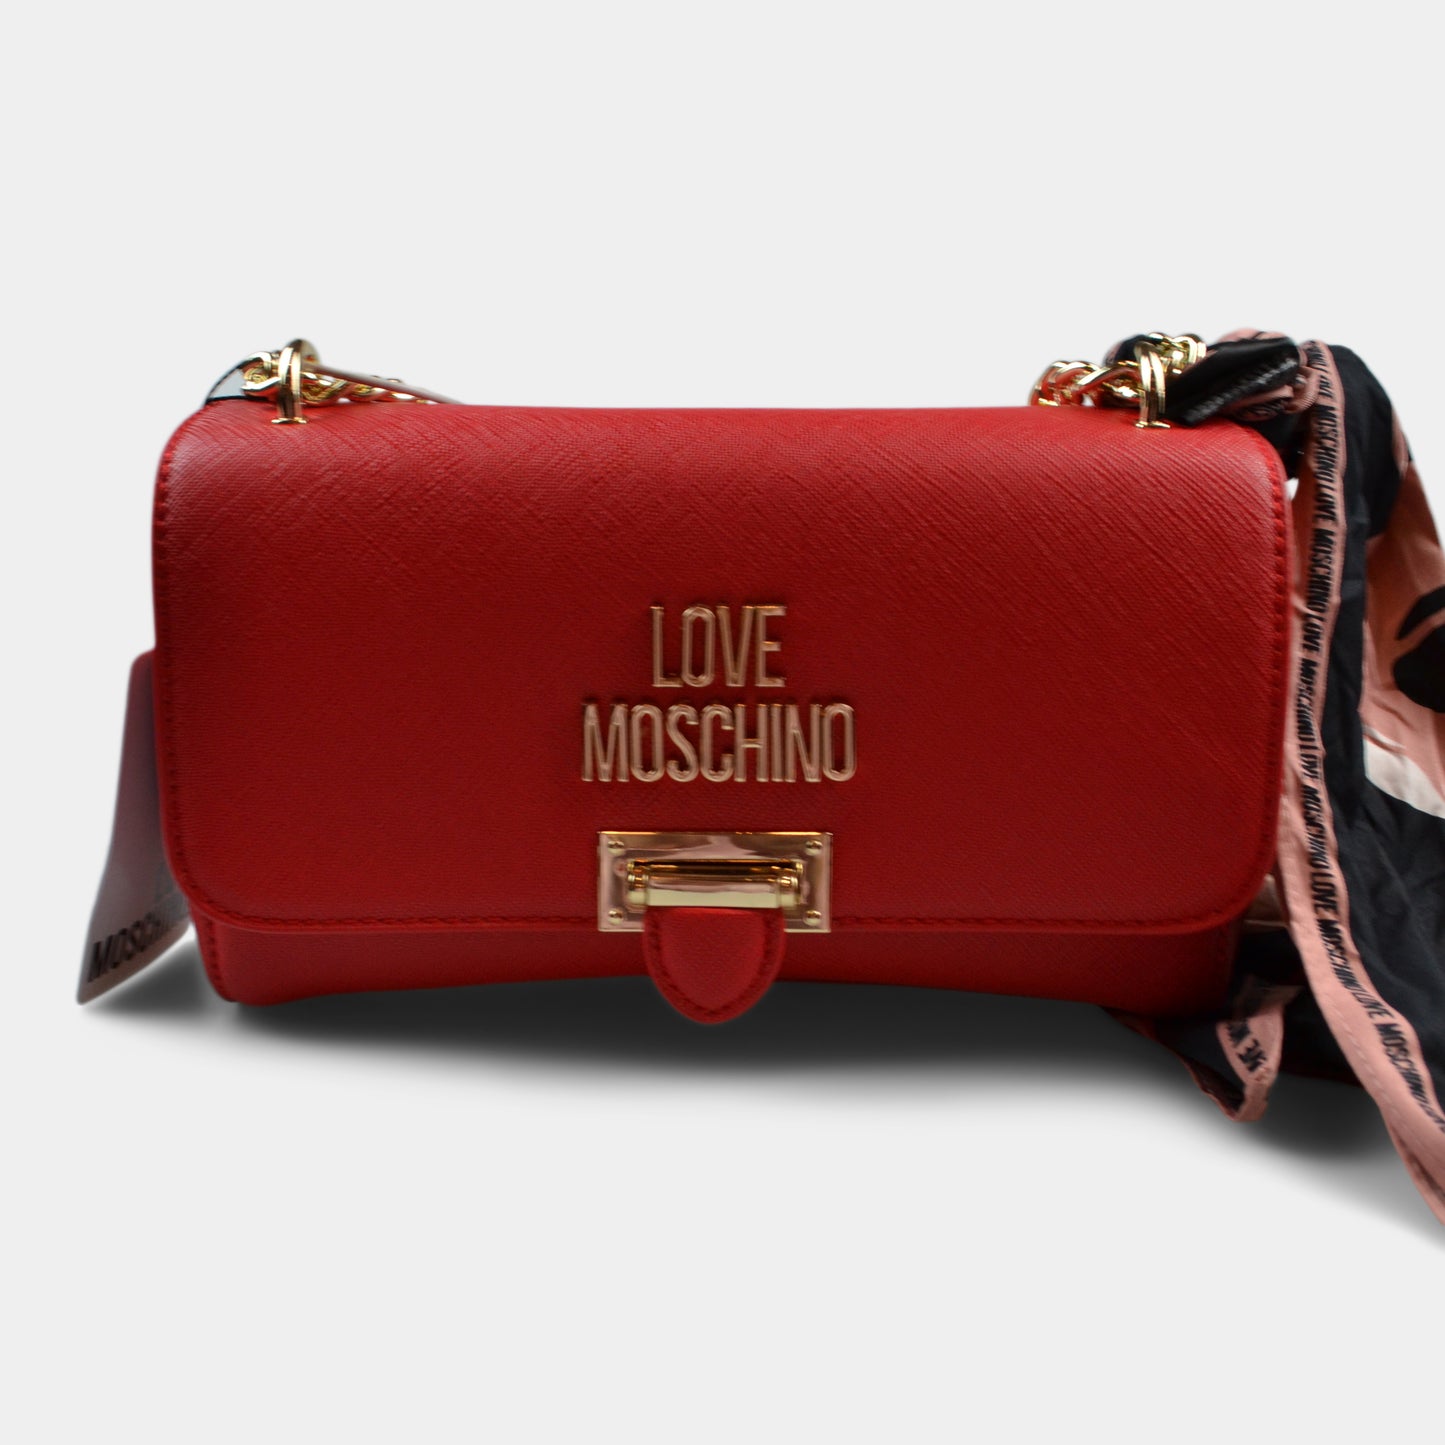 LOVE MOSCHINO SHOULDER BAG WITH LOGO IN RED